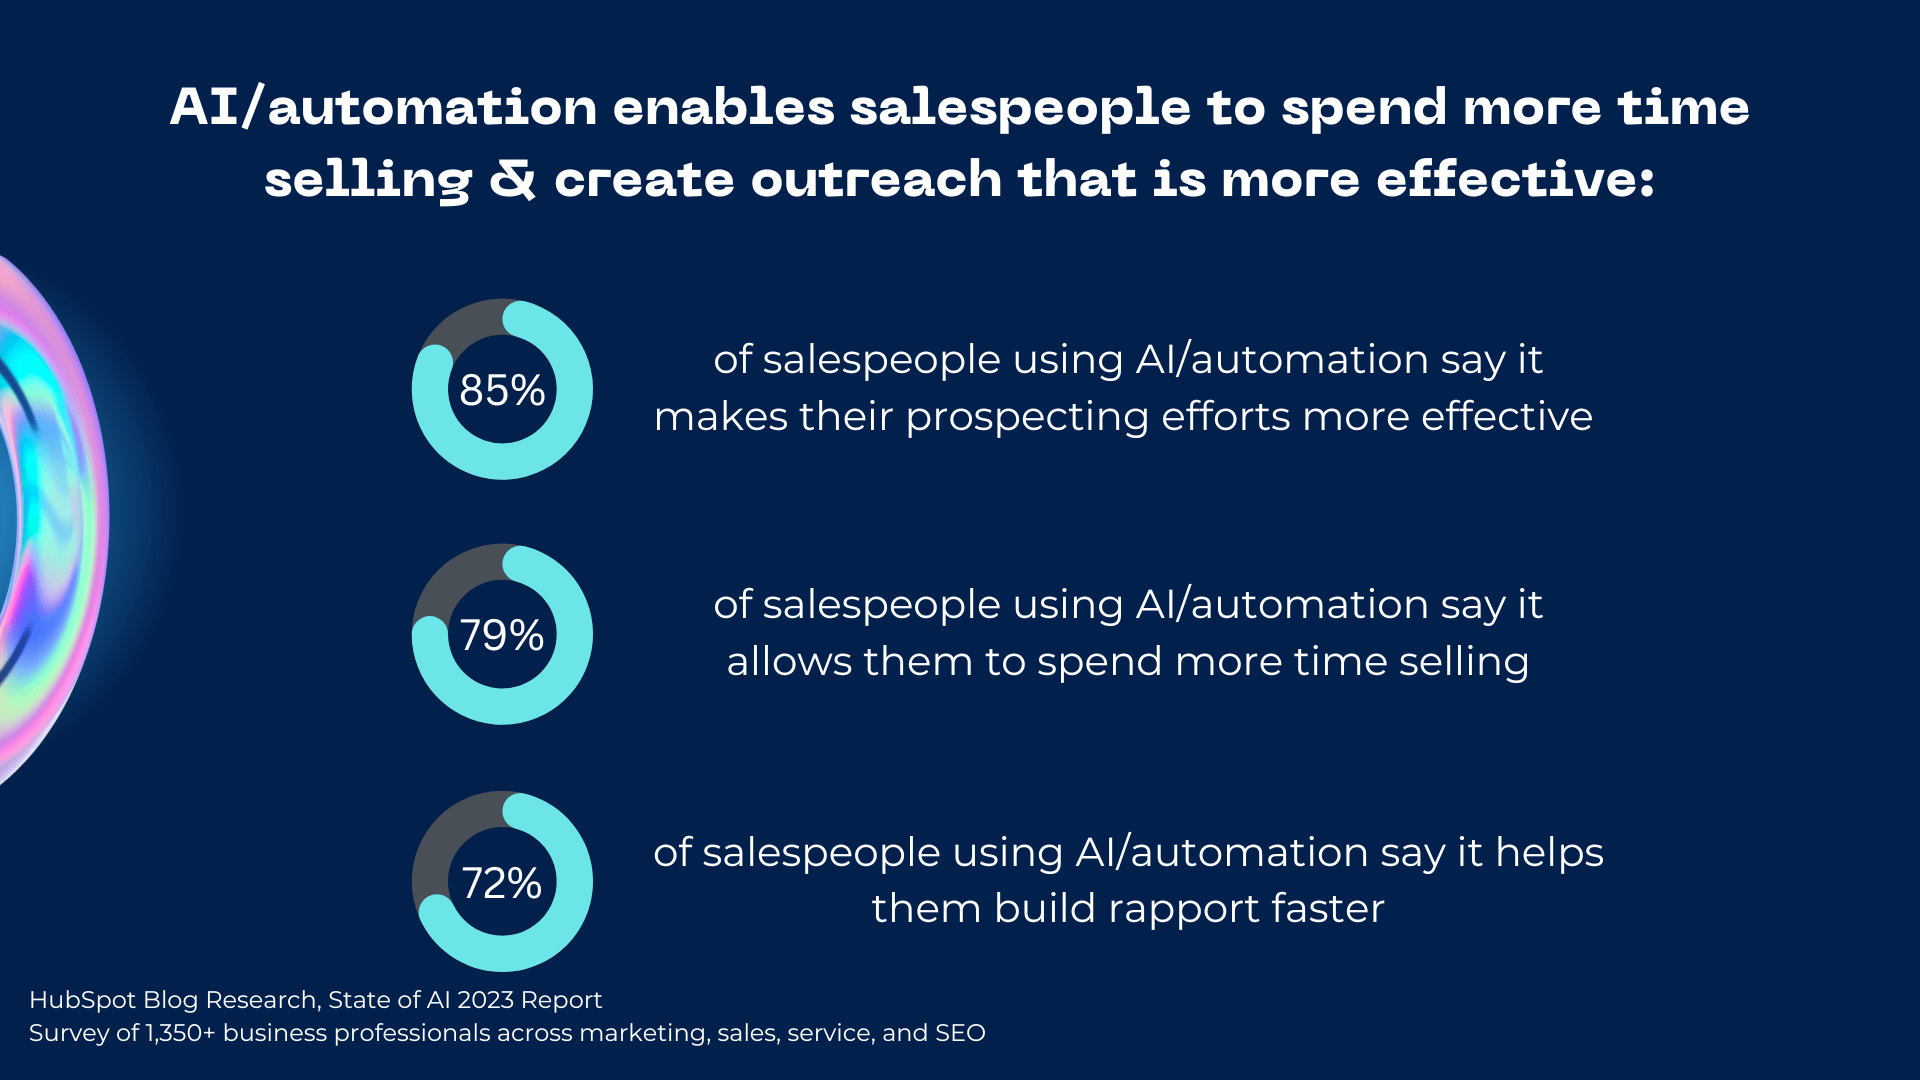 ai%20helps%20salespeople%20send%20more%20effective%20outreach.png?width=1920&height=1080&name=ai%20helps%20salespeople%20send%20more%20effective%20outreach - The HubSpot Blog’s State of AI Report [Key Findings from 1300+ Business Professionals]